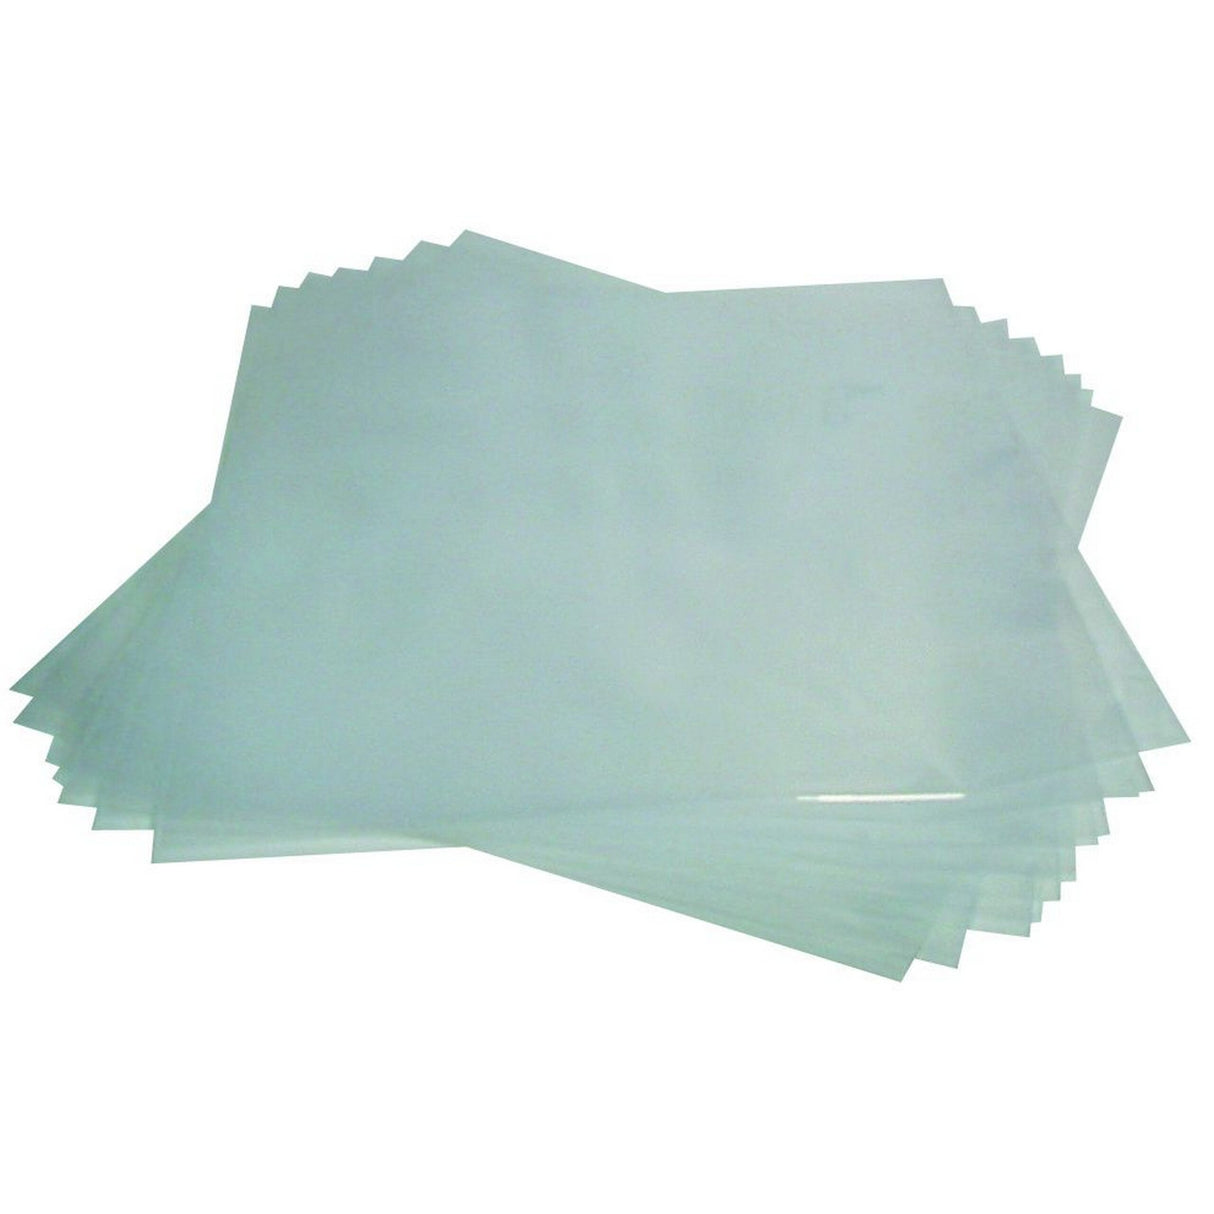 Glorious 12.5 Inch Protection Sleeve, 100 Pack